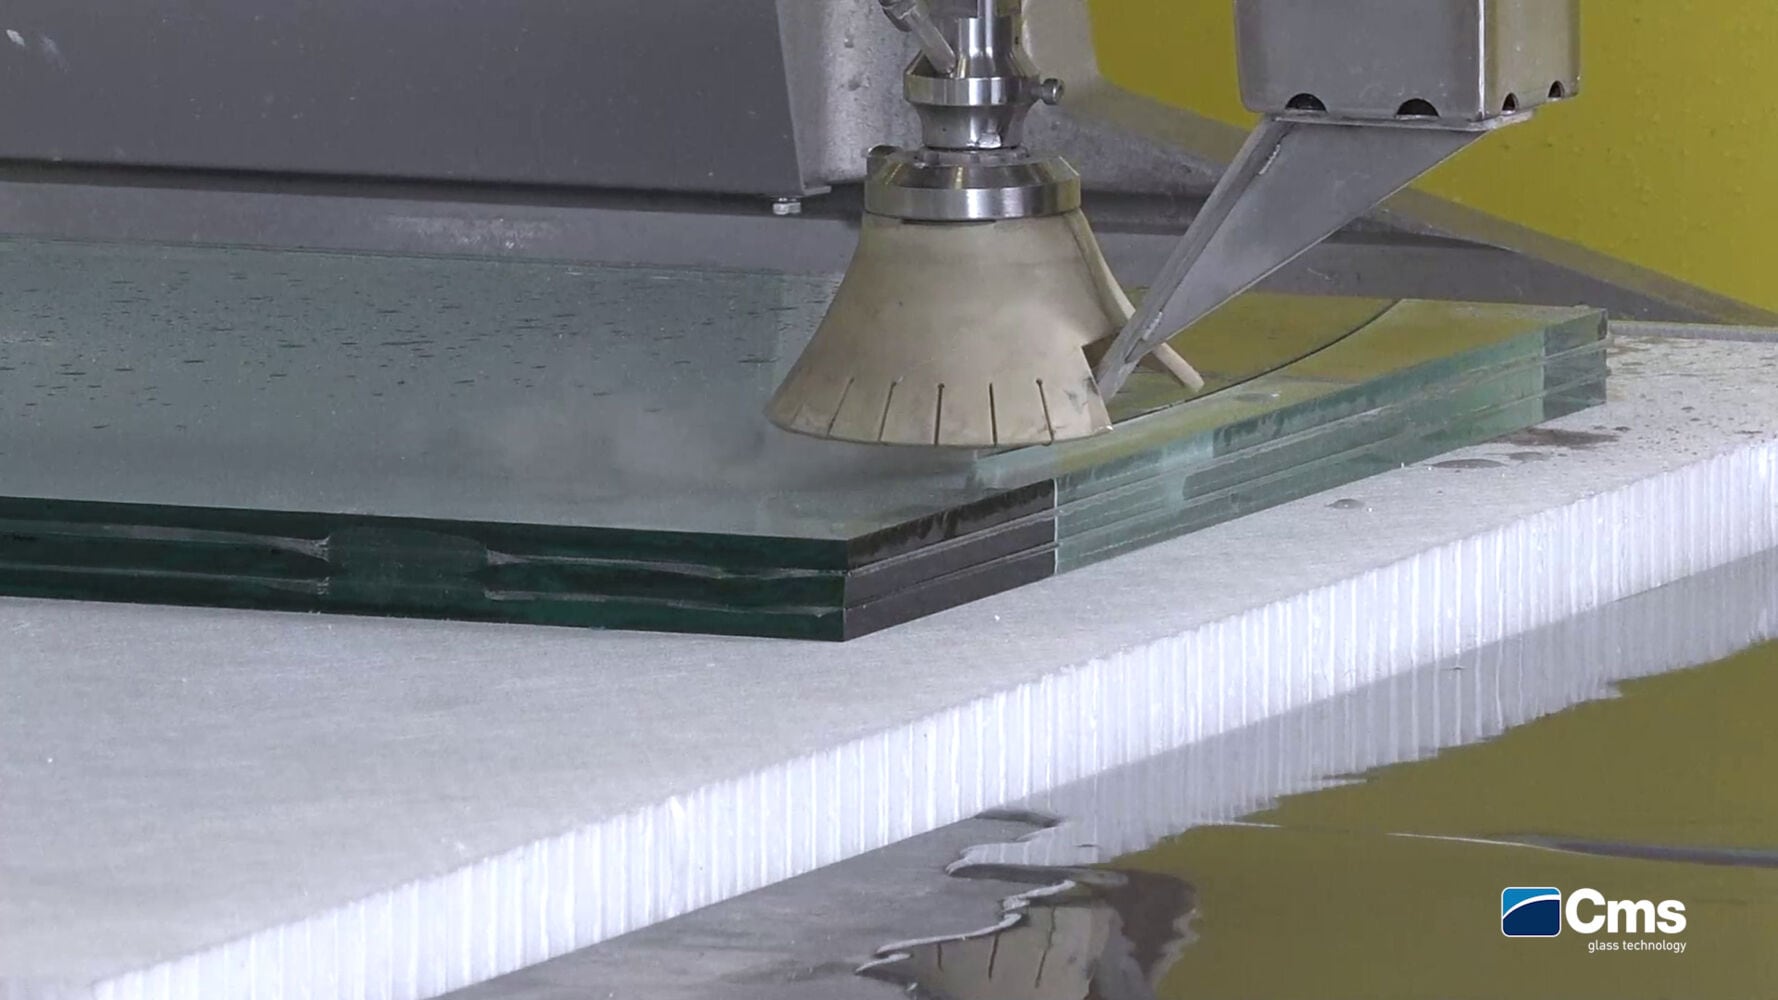 CMS smartline: the ideal waterjet machine for processing laminated safety glass